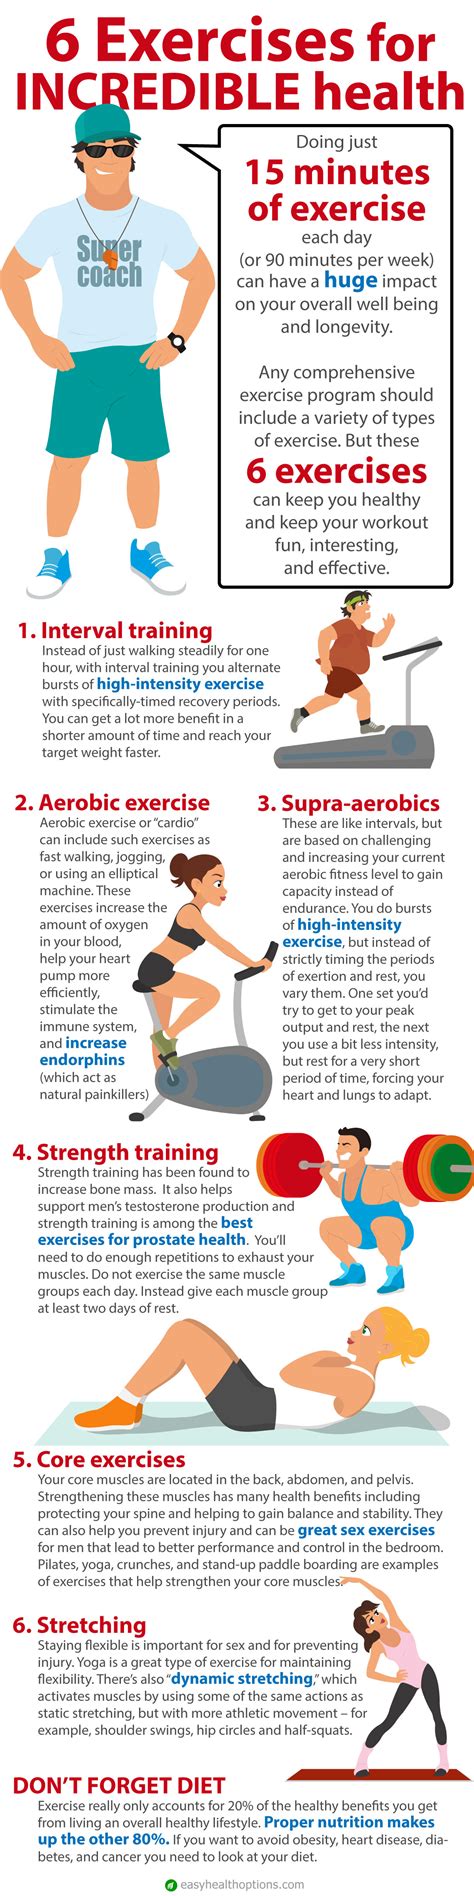 Exercises For Incredible Health Infographic Easy Health Options